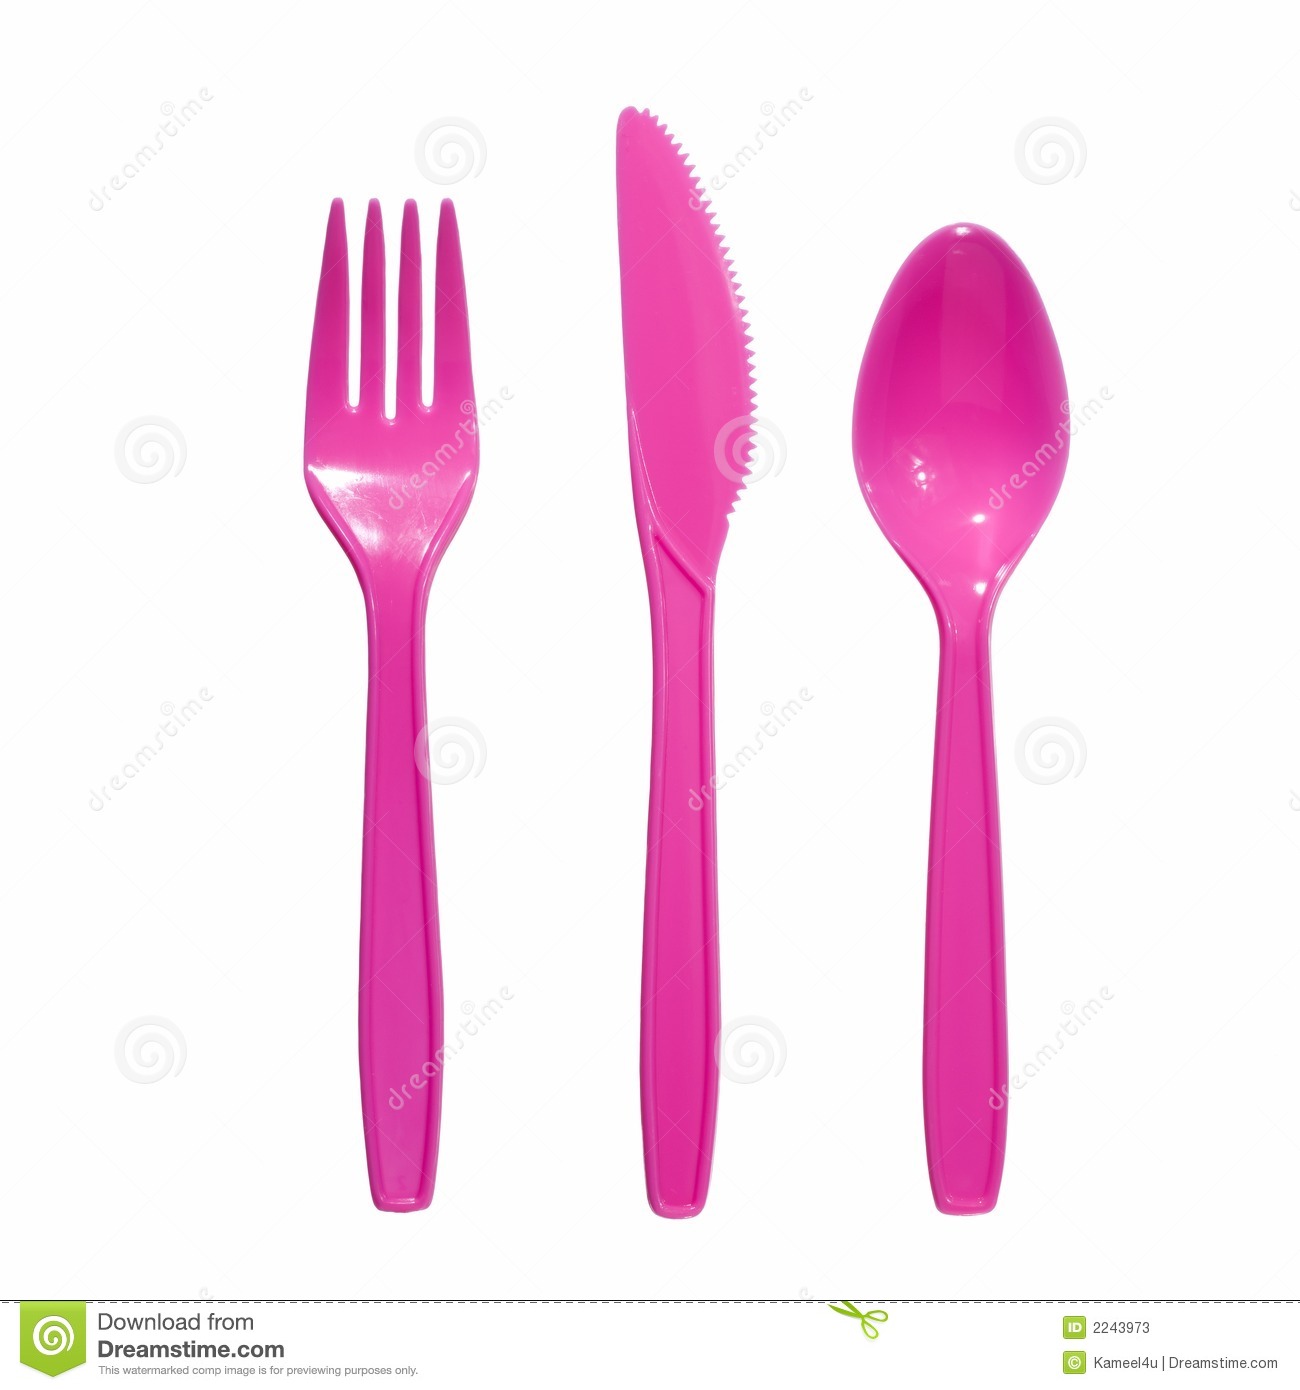 Vibrant Pink Plastic Fork Knife And Spoon Isolated On White